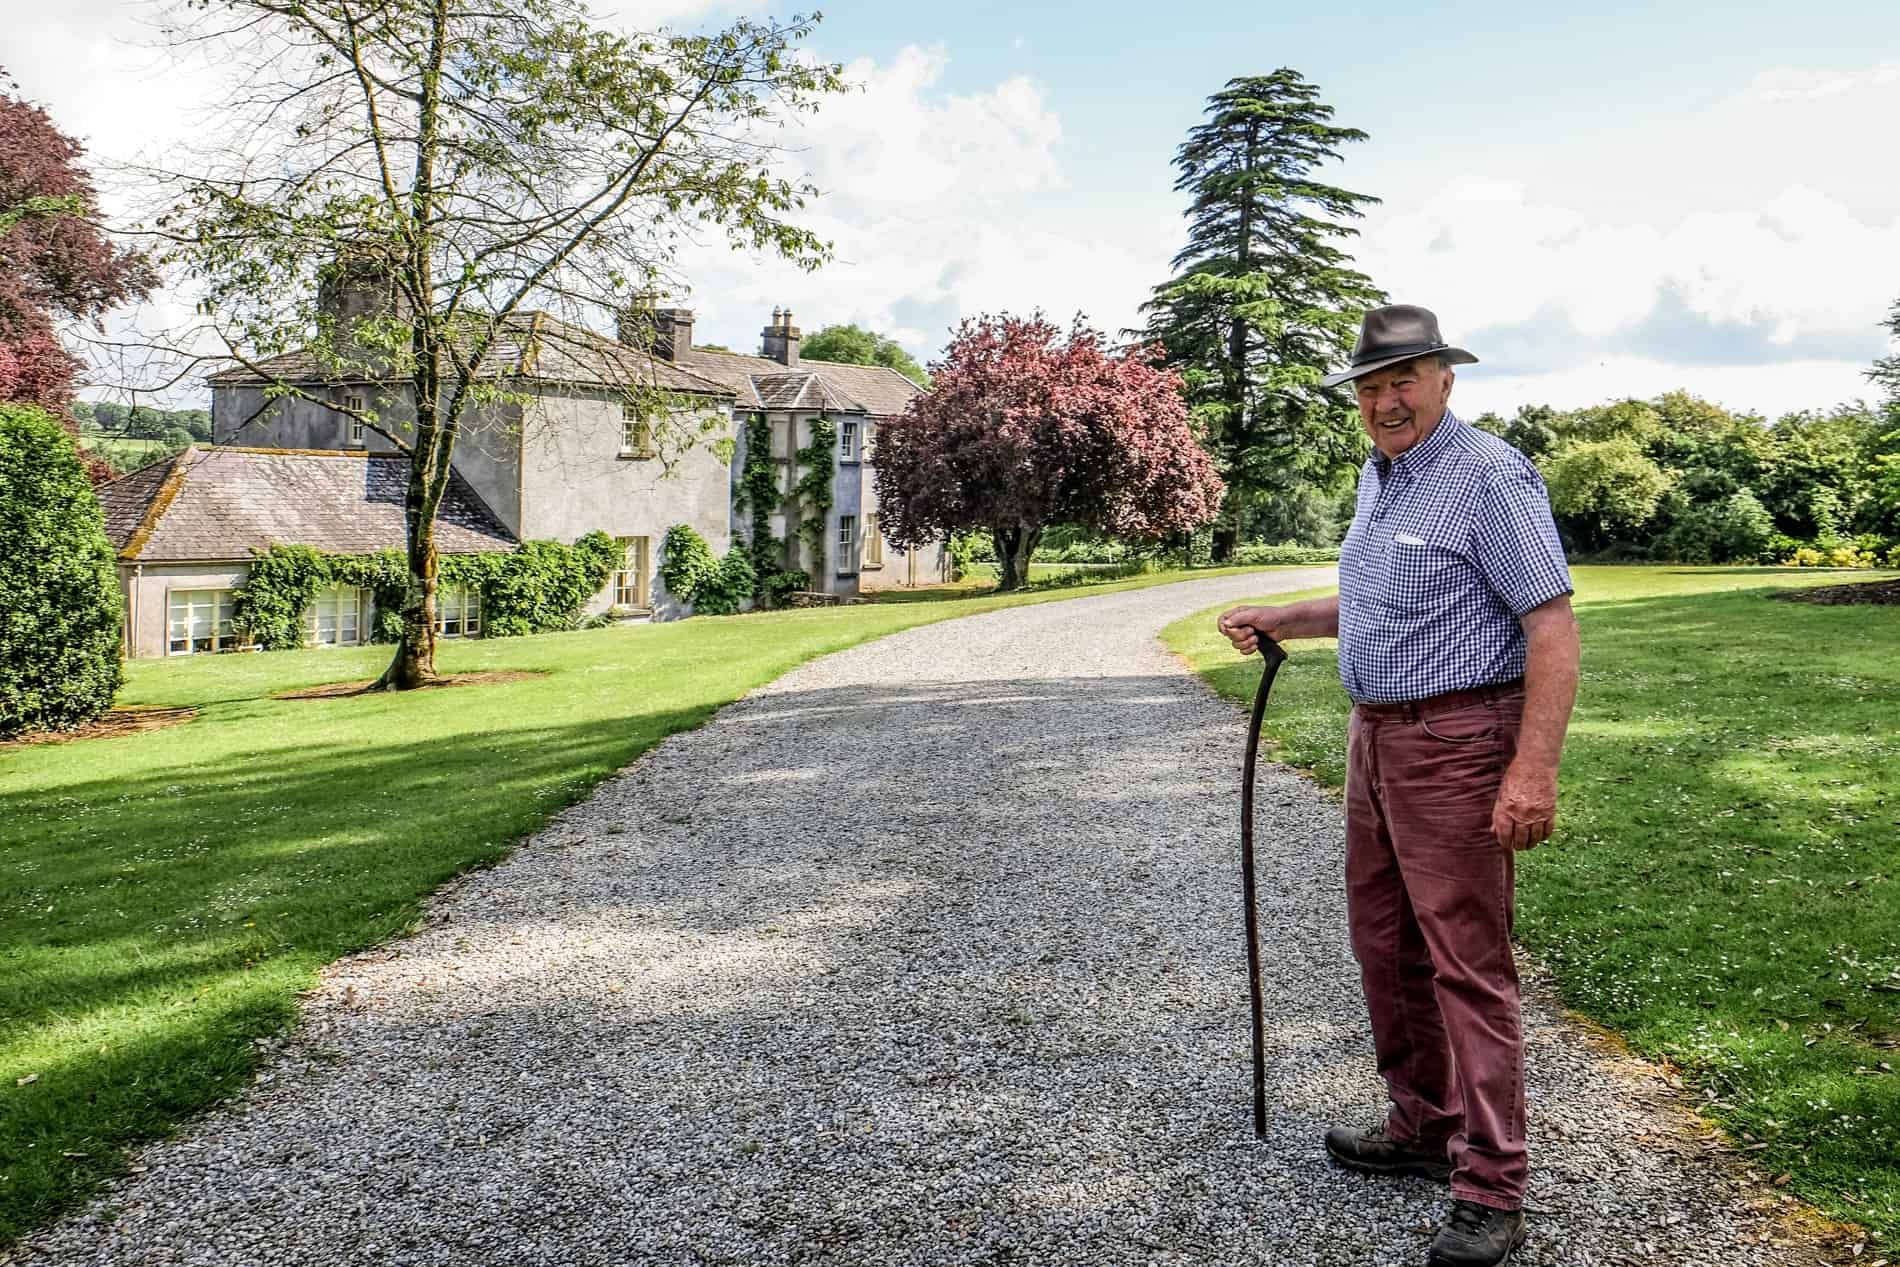 Land owner, Joe O'Connor on a gravel path in front of a farm house on the grounds of Jerpoint Park. 